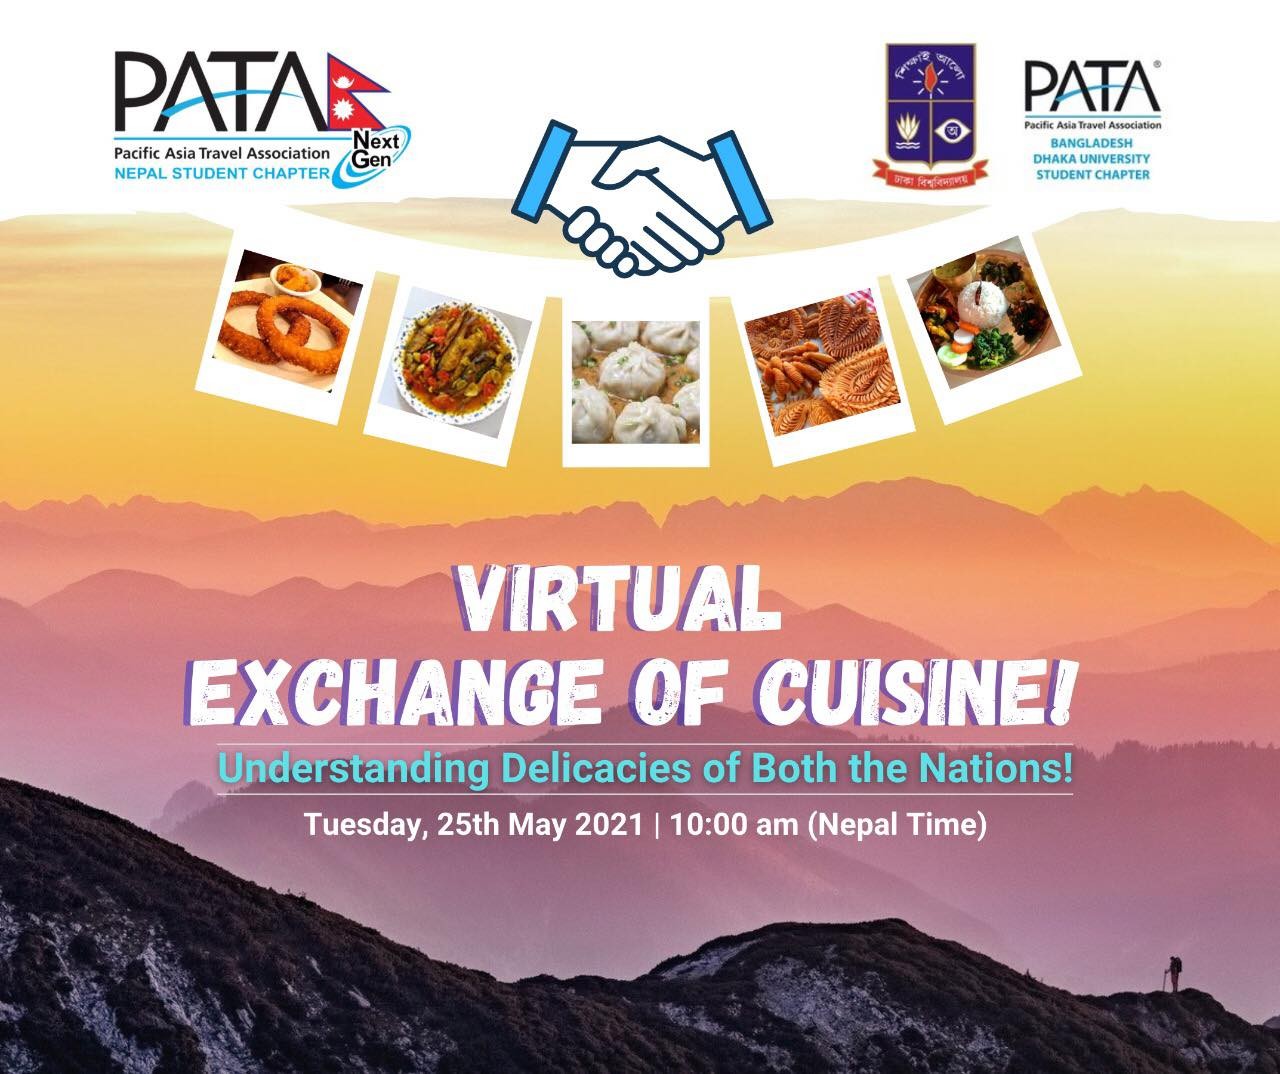 PATA Nepal Student Chapter Organizes A Webinar On "Virtual Exchange Of Cuisine" In Collaboration With PATA Bangladesh Dhaka University Student Chapter